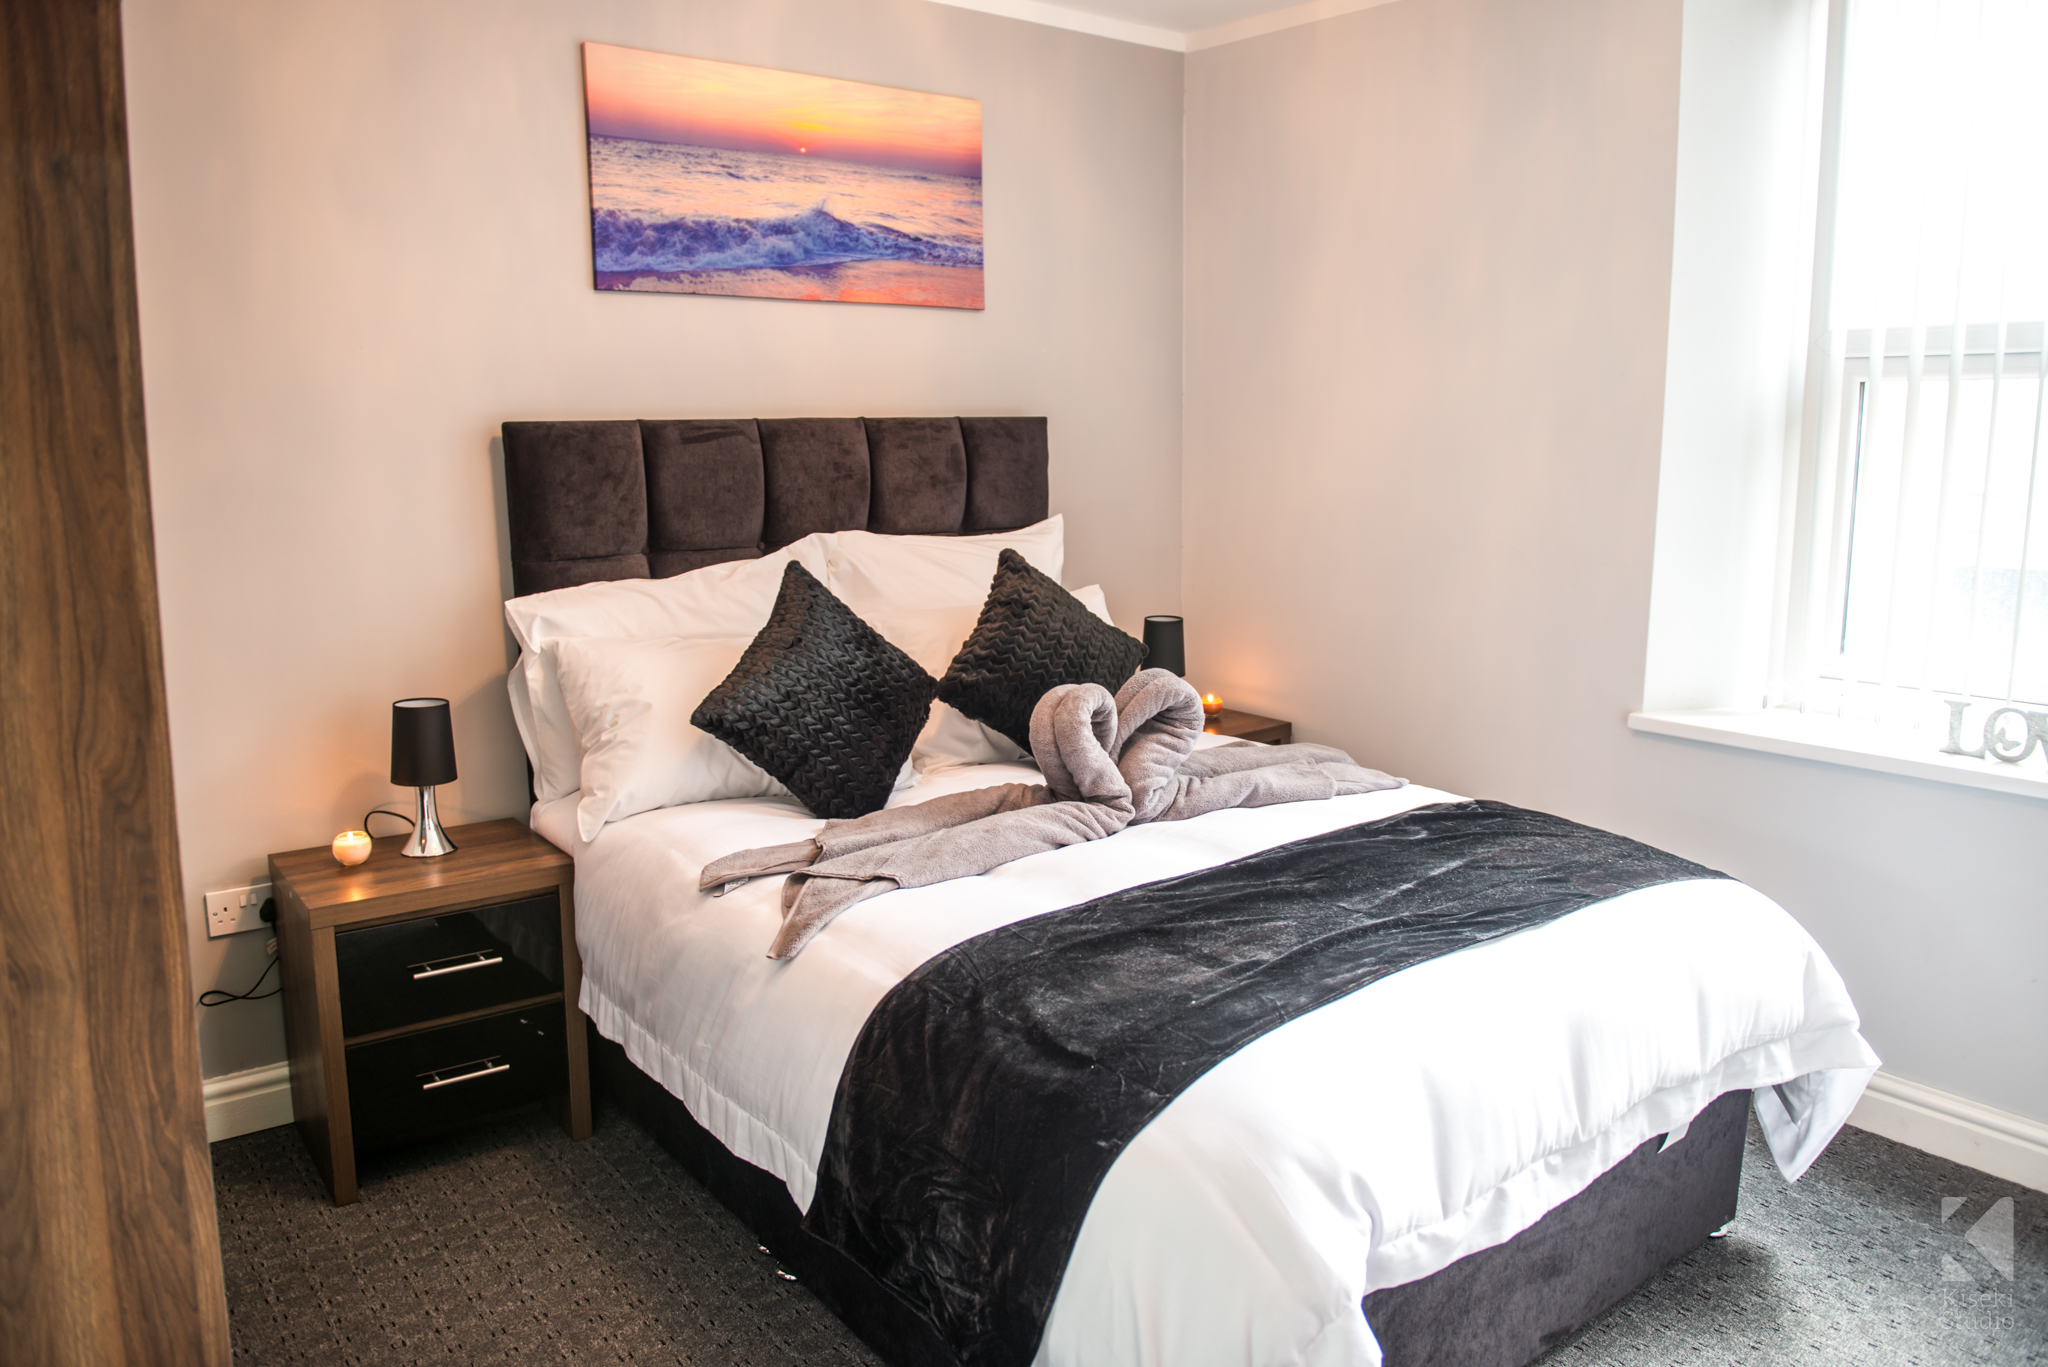 meridian-apartments-bradford-commerical-professional-photography-building-rental-serviced-bedroom